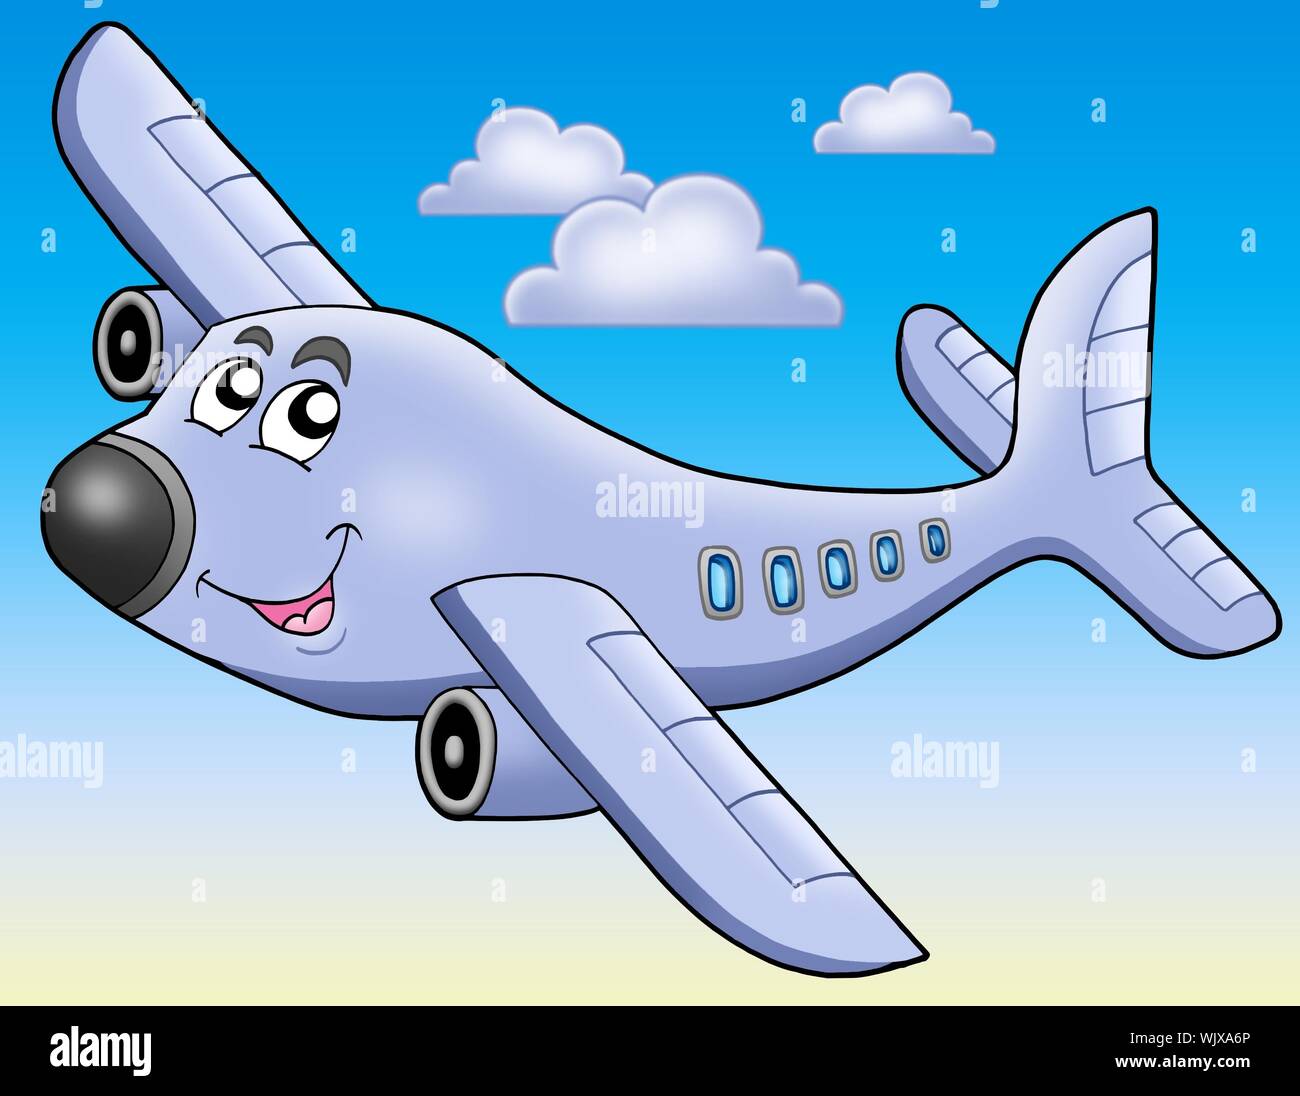 Aeroplane Drawing for Kids - Easy Step-by-Step Tutorials